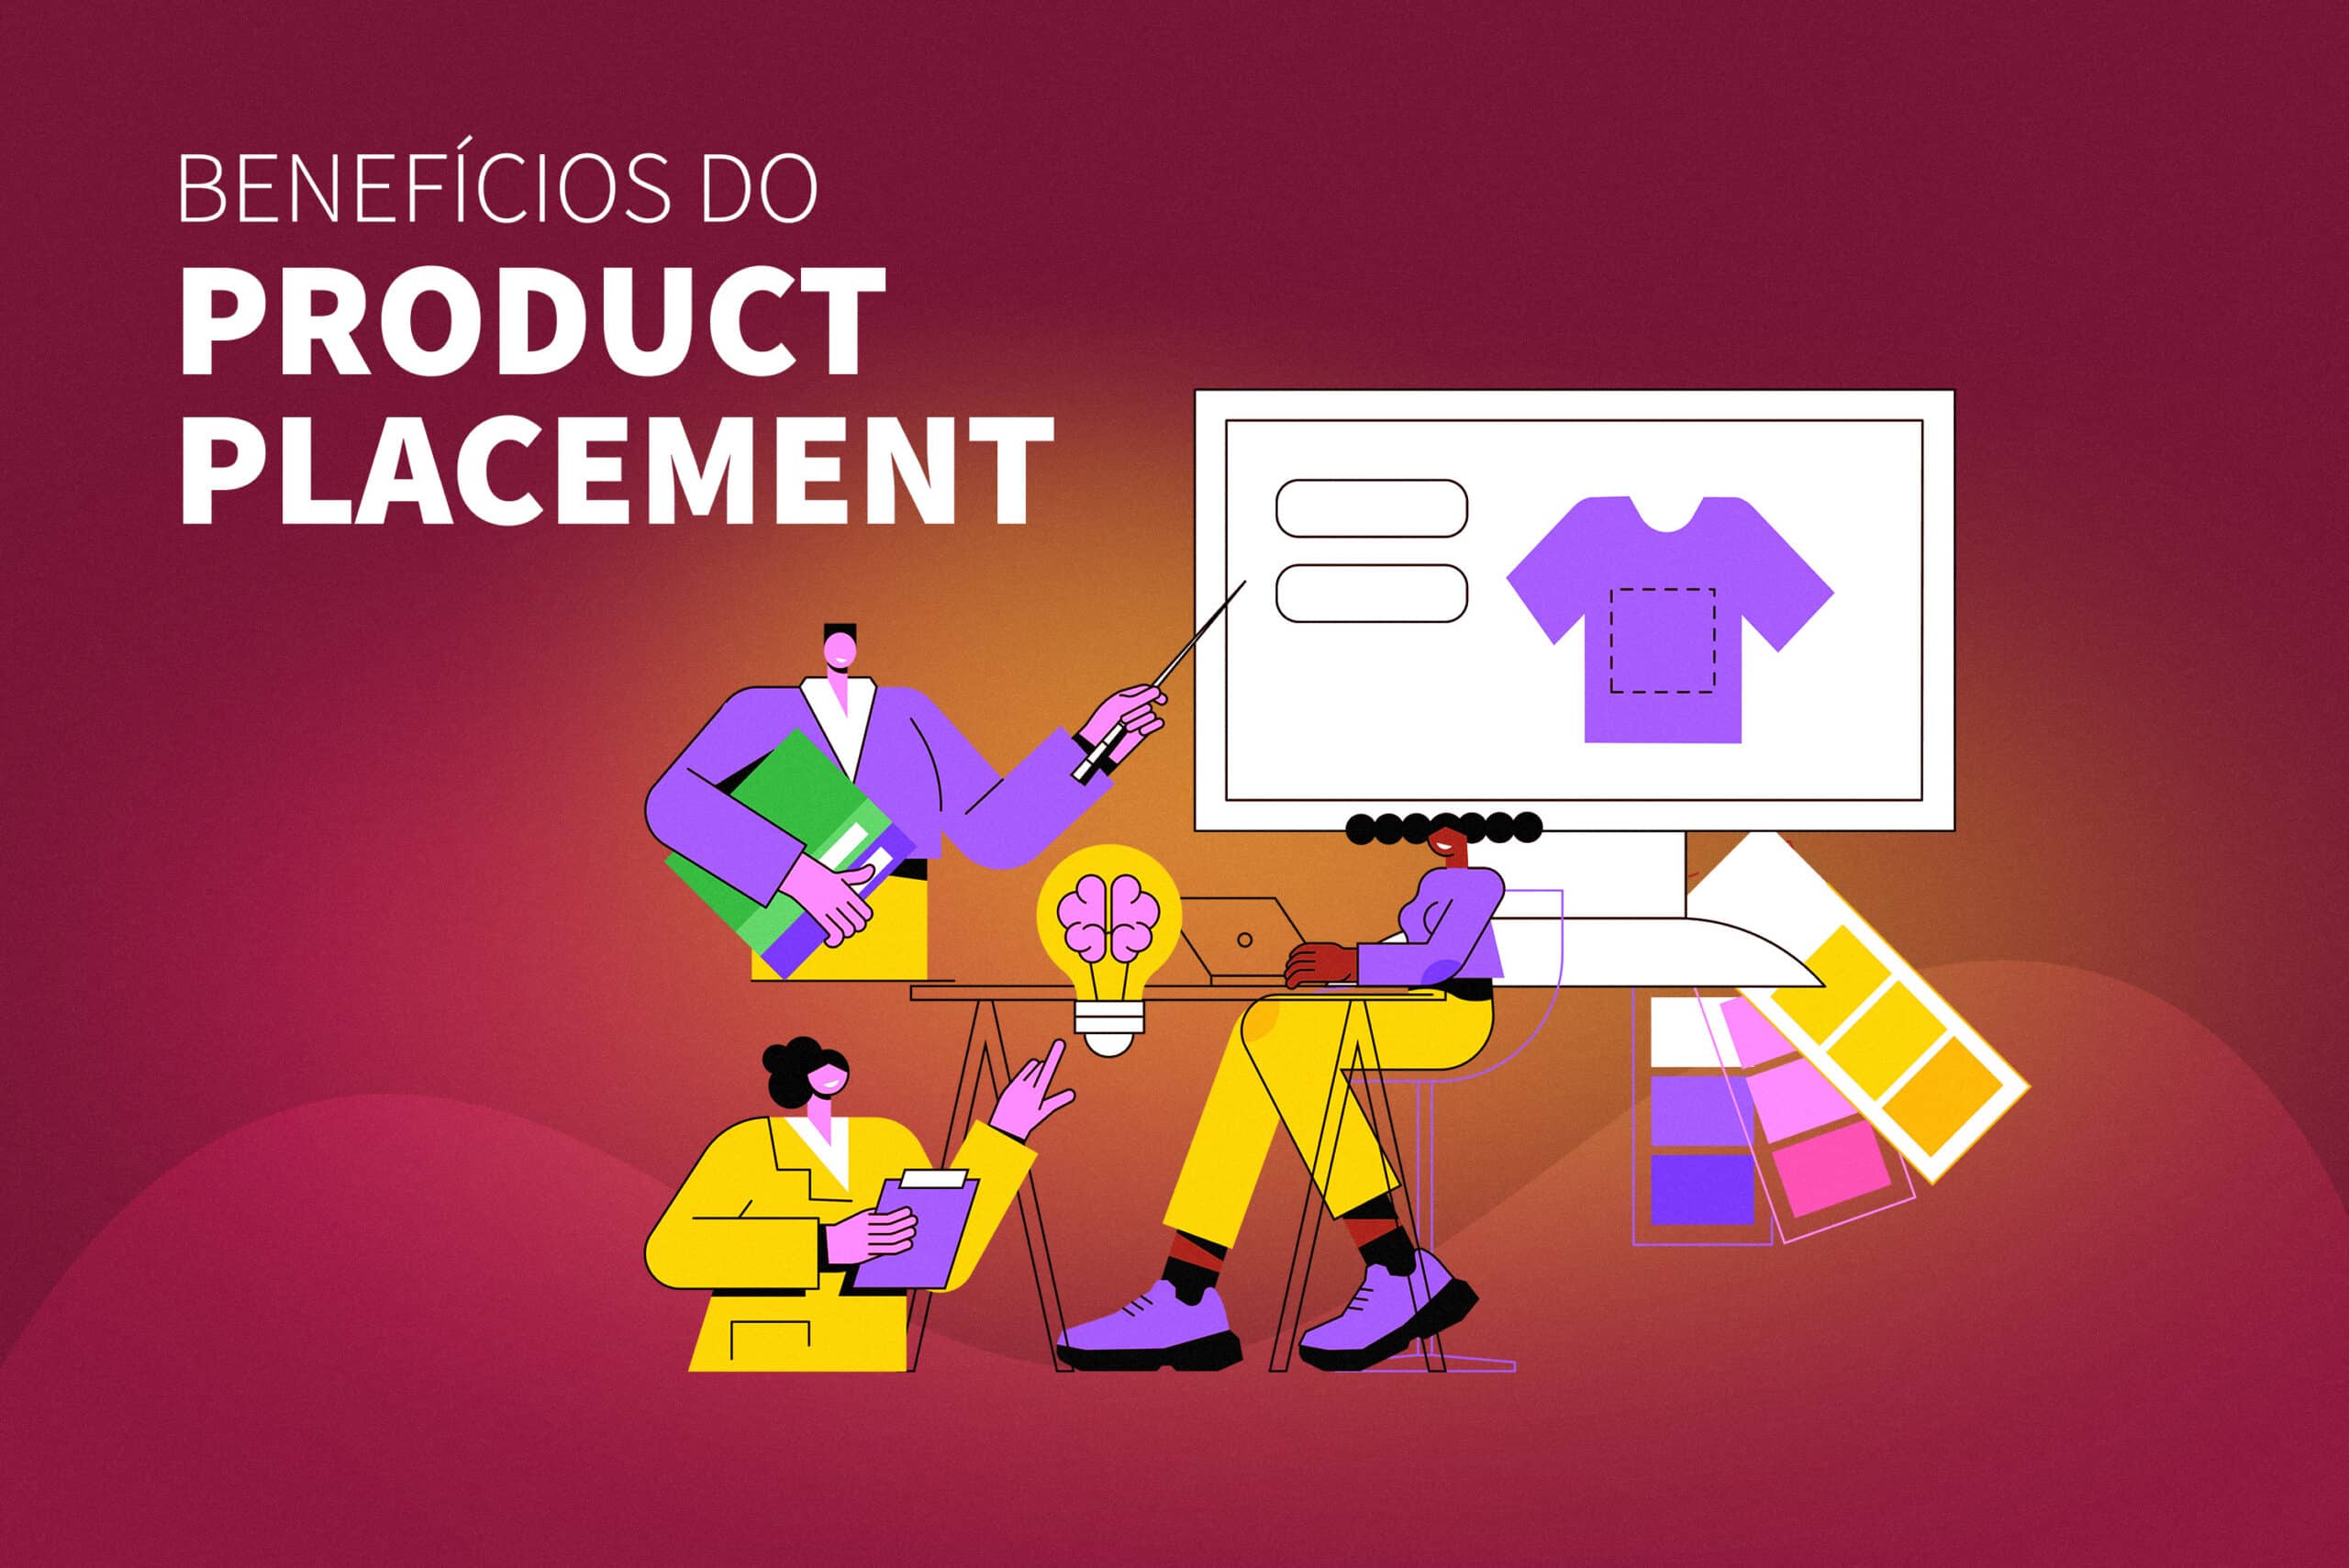 Benefícios do product placement